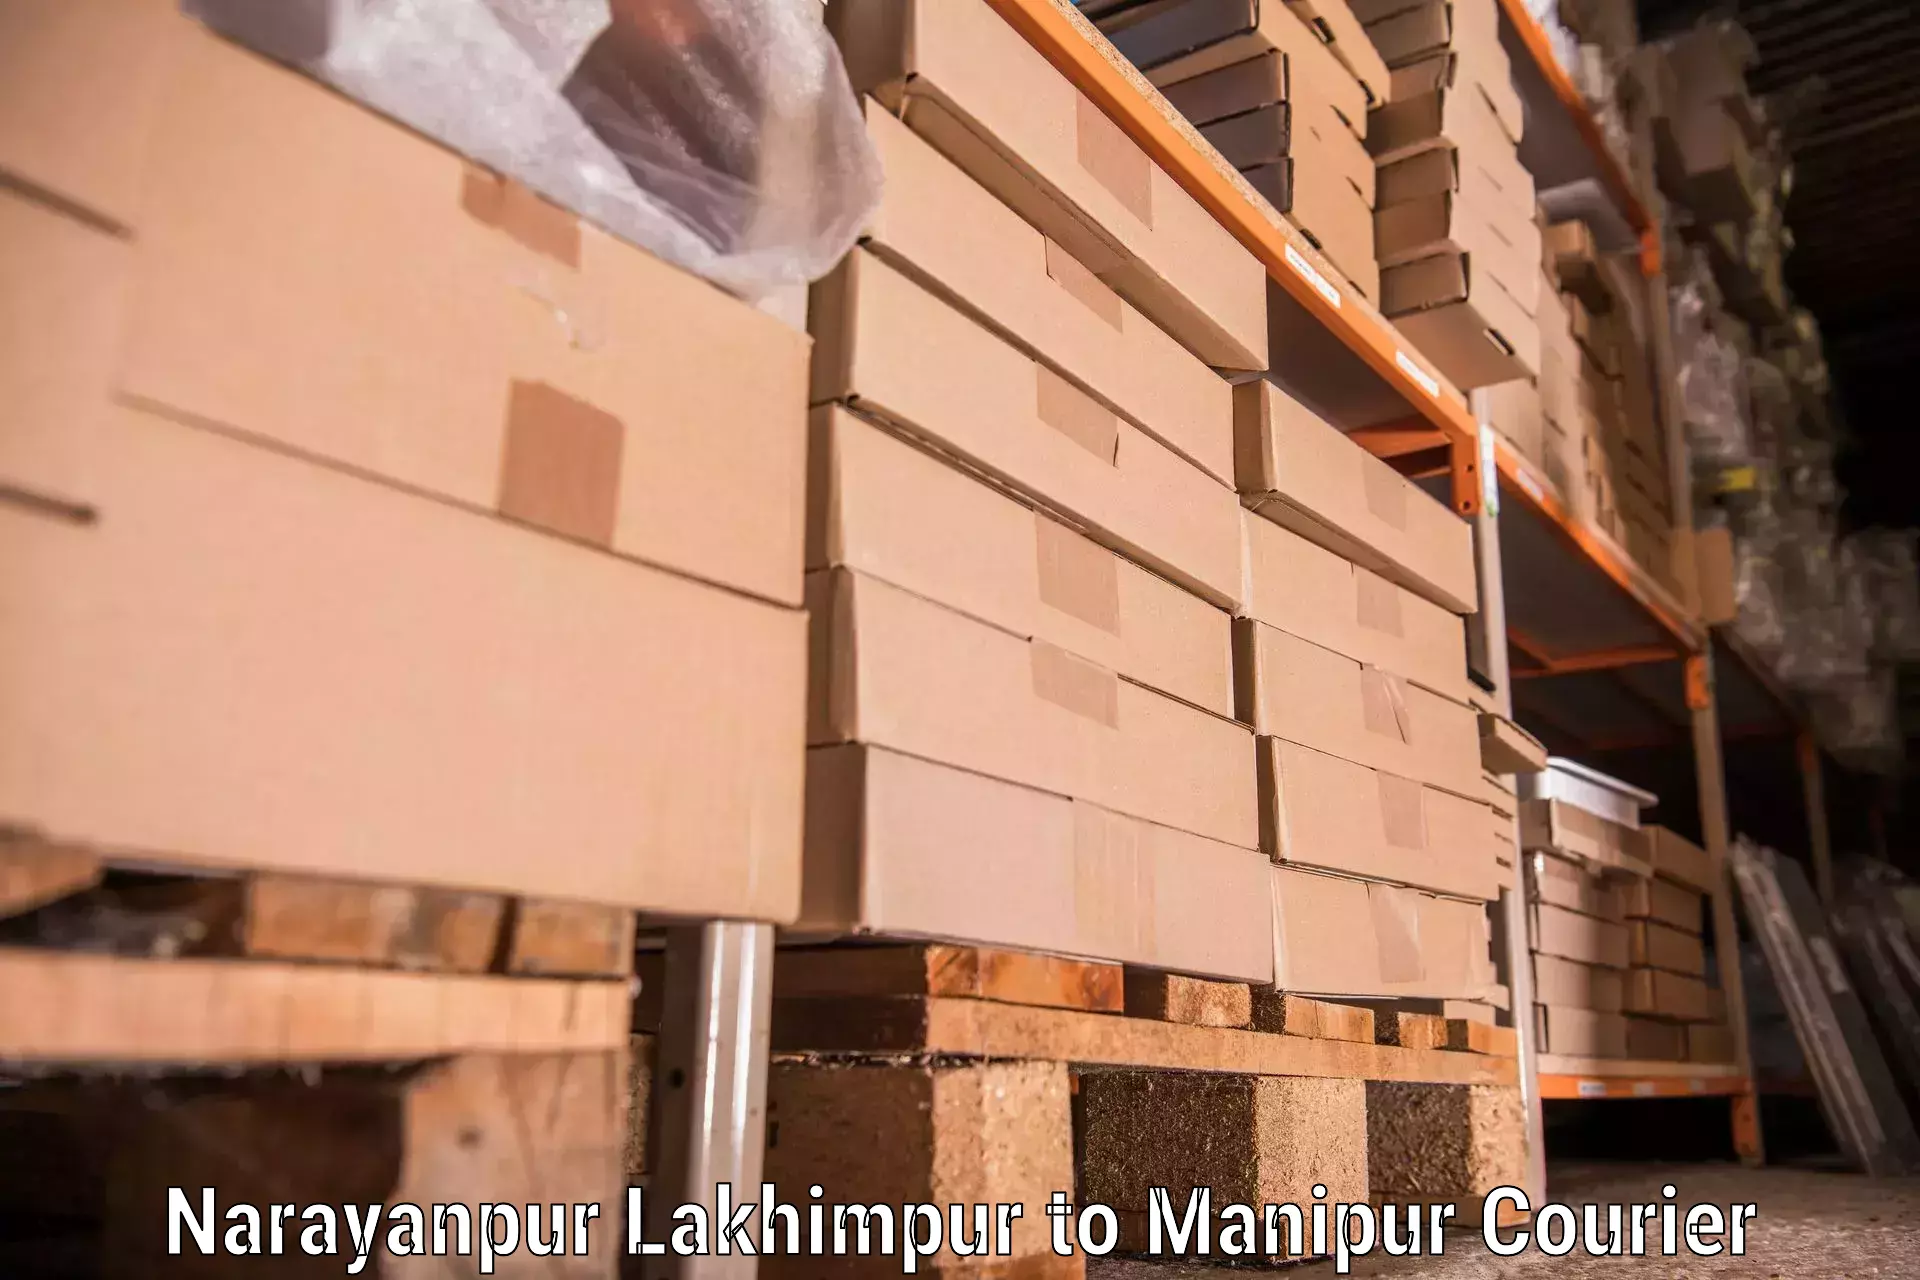 Quality relocation assistance in Narayanpur Lakhimpur to Manipur